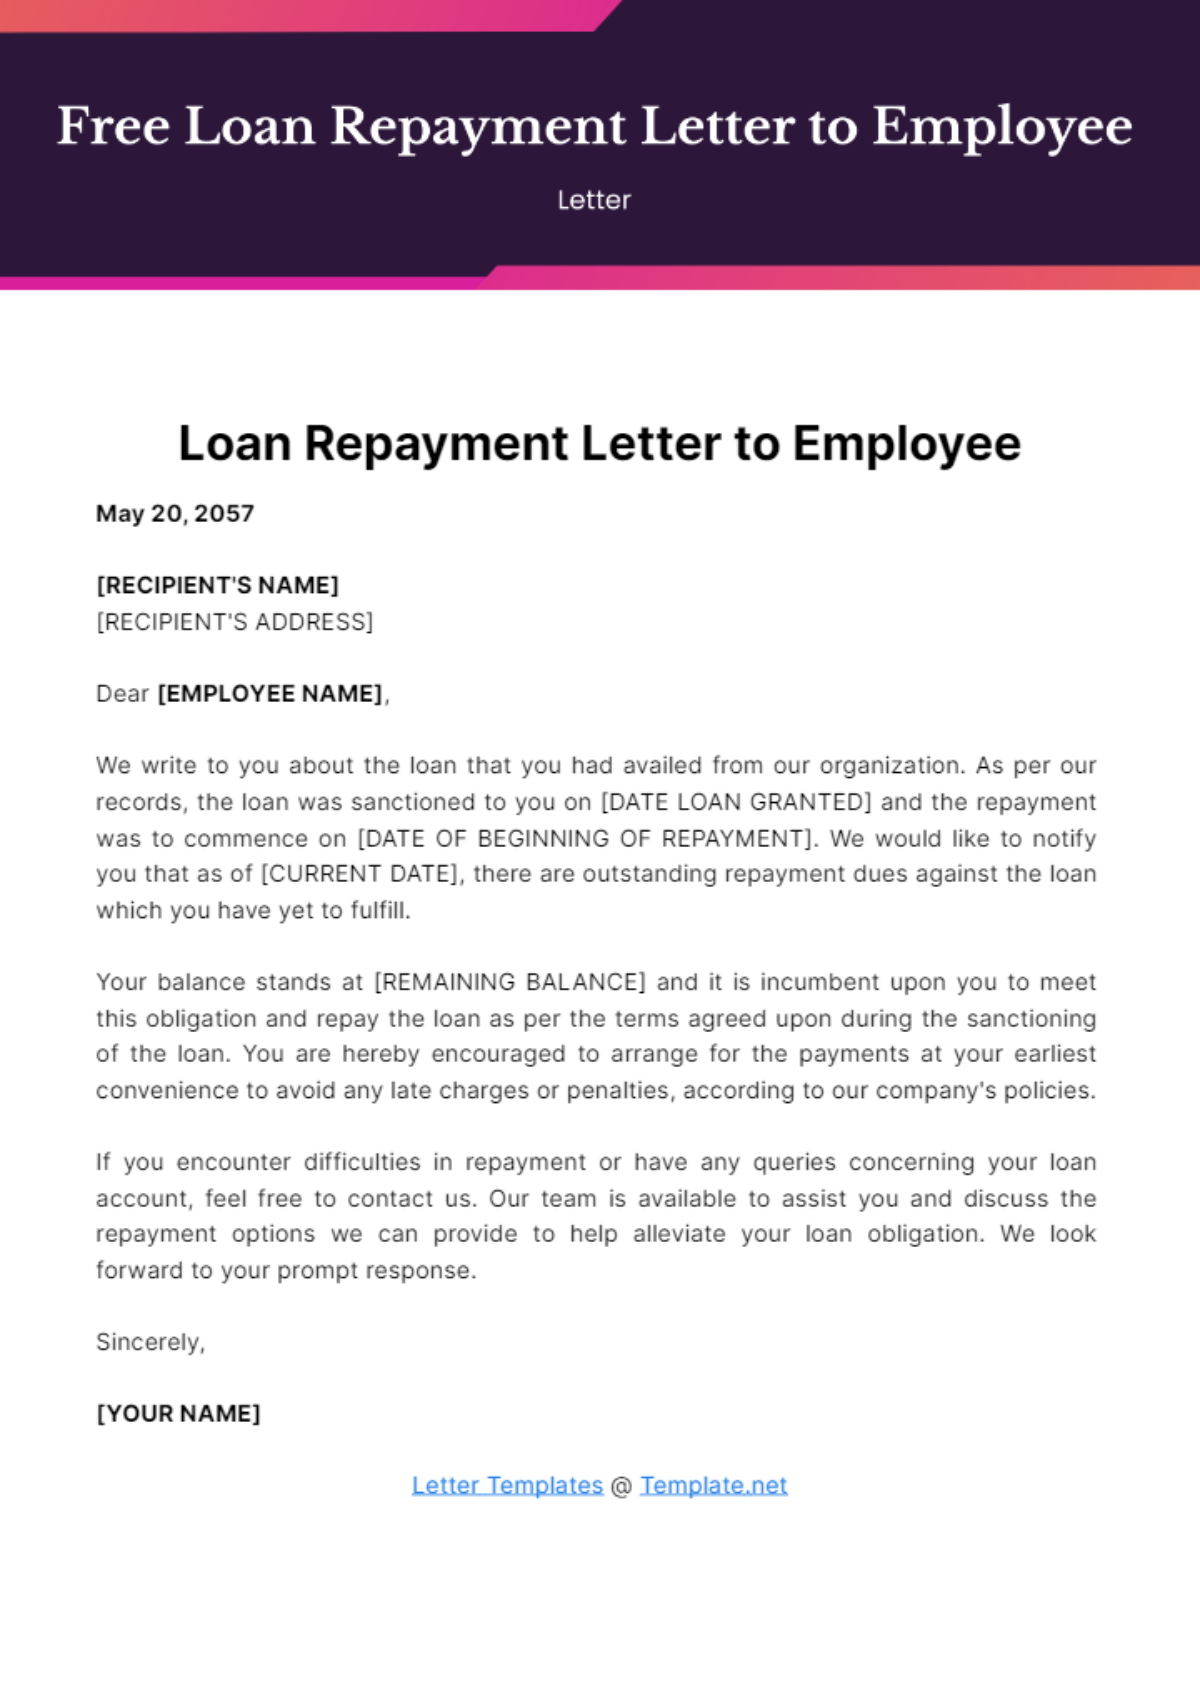 Free Loan Repayment Letter to Employee Template